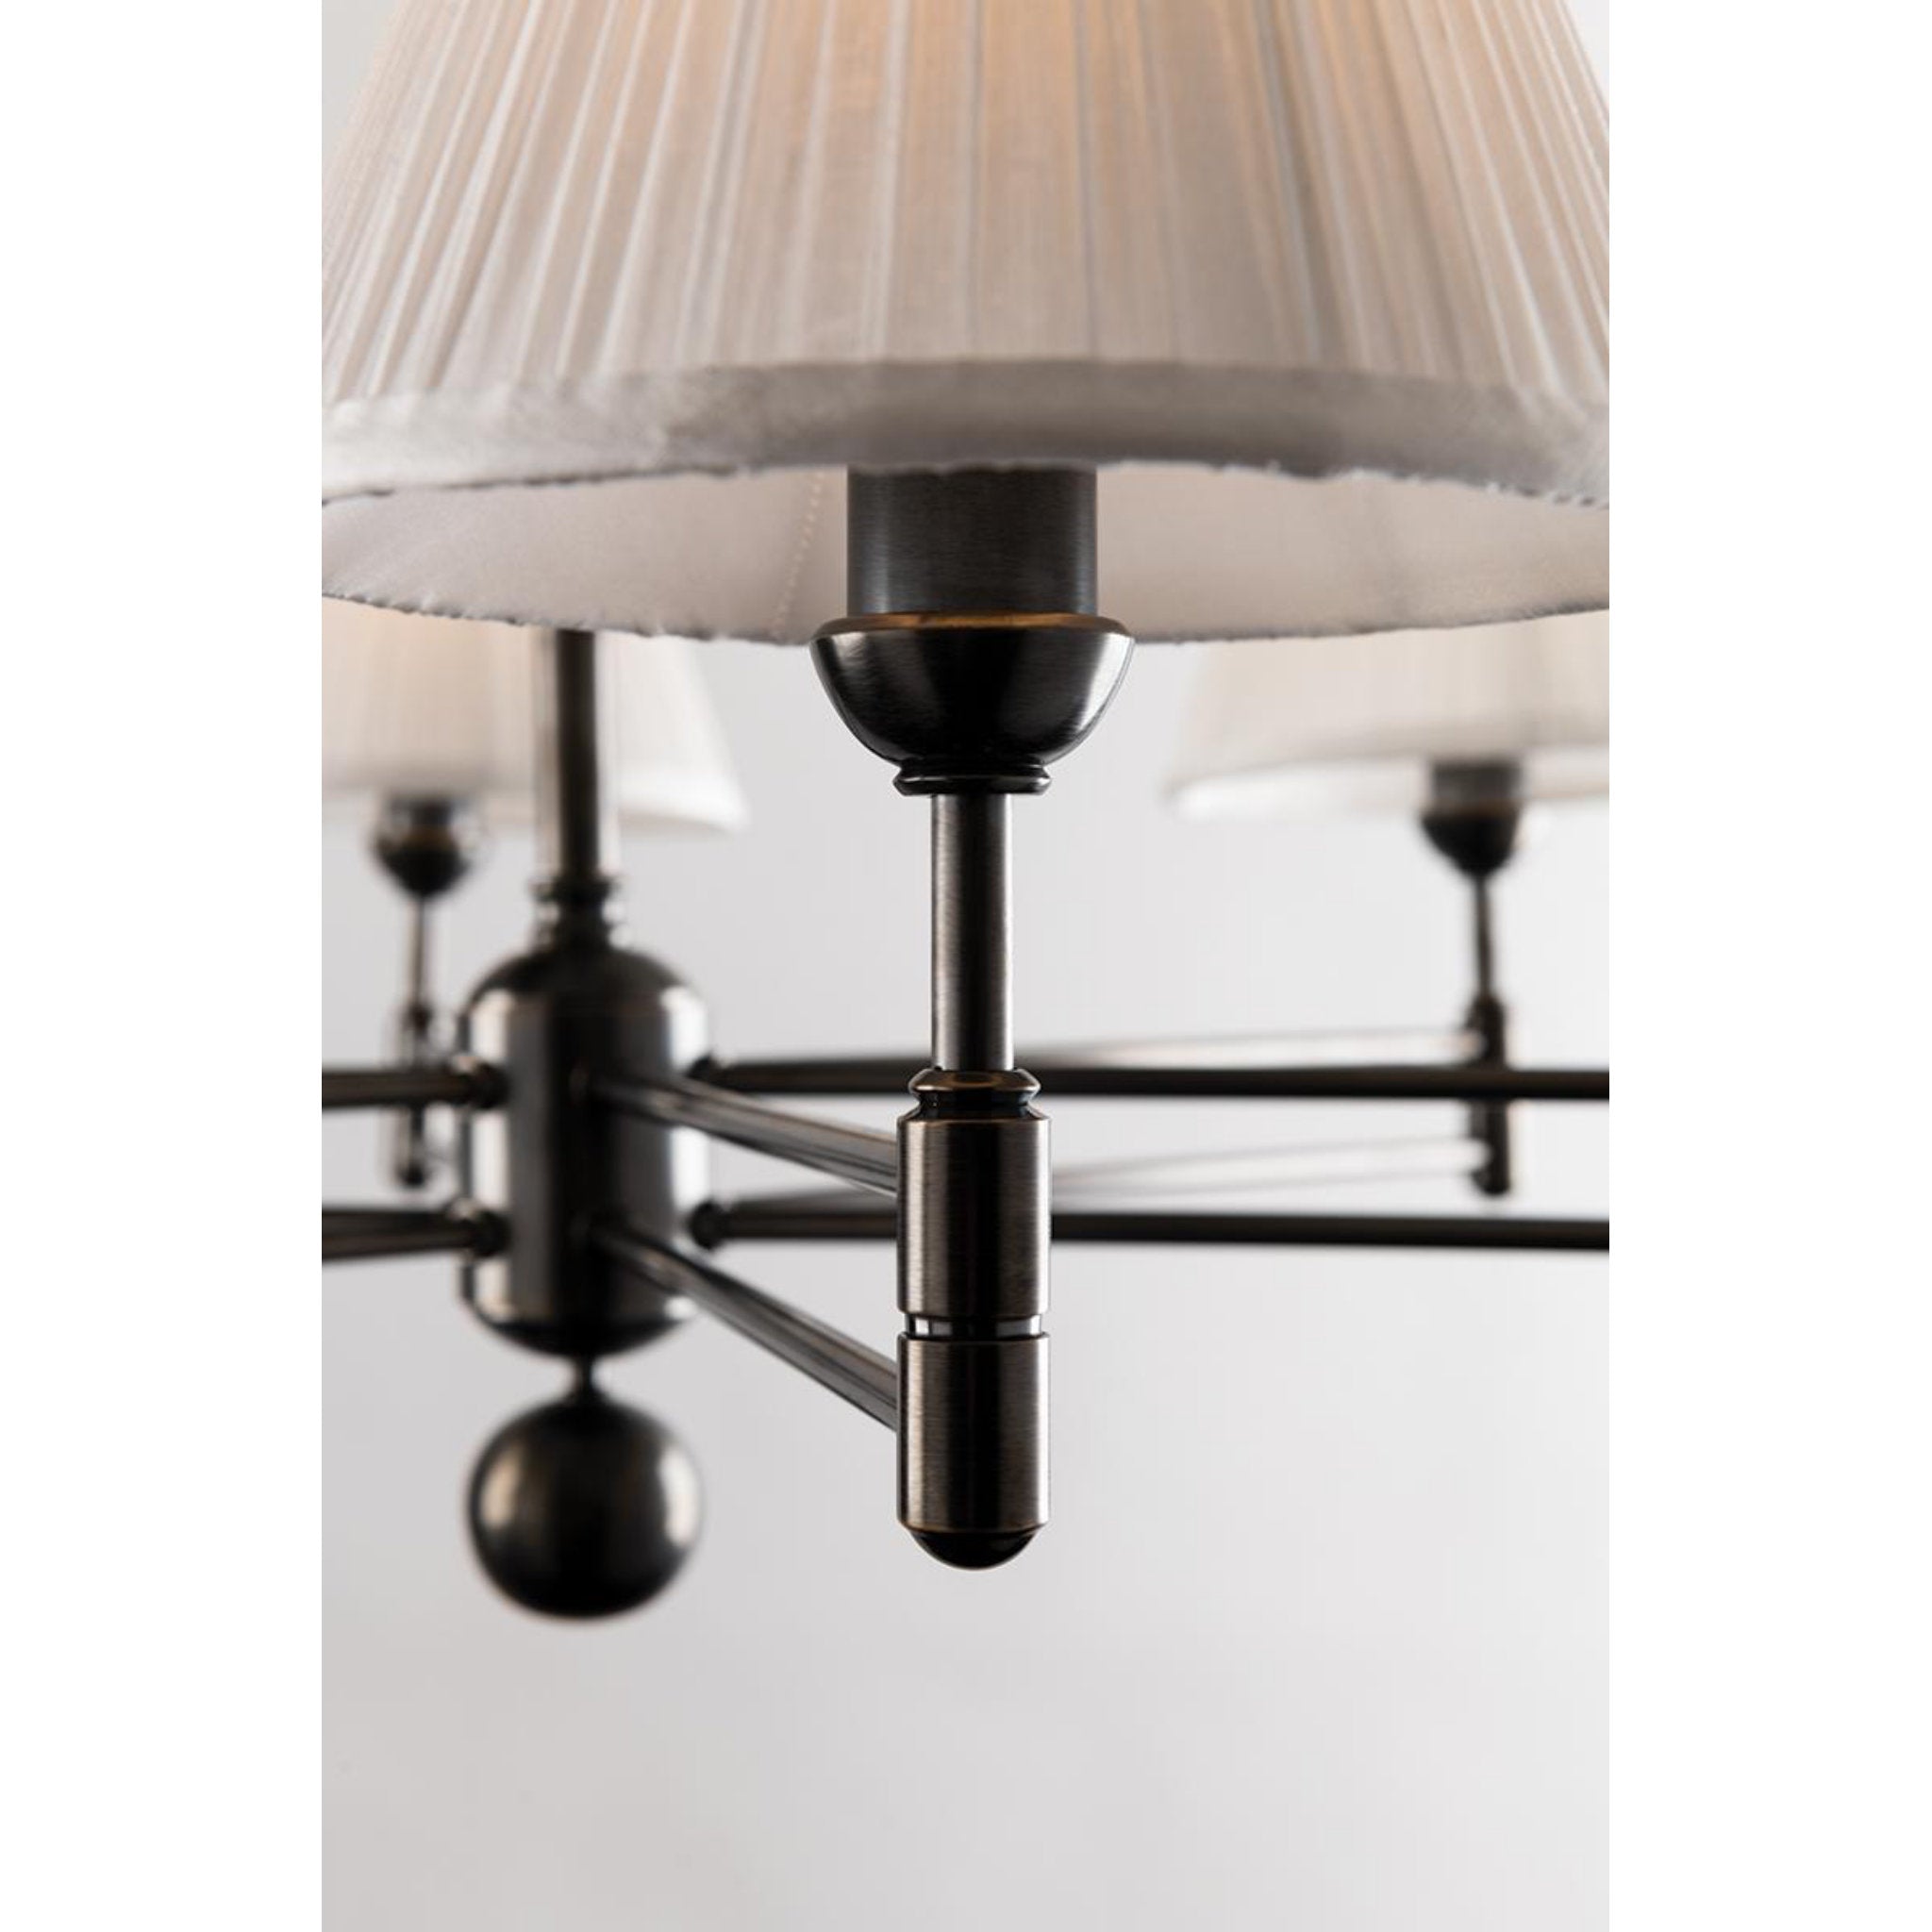 Classic No.1 1 Light Plug-in Sconce in Aged Brass by Mark D. Sikes